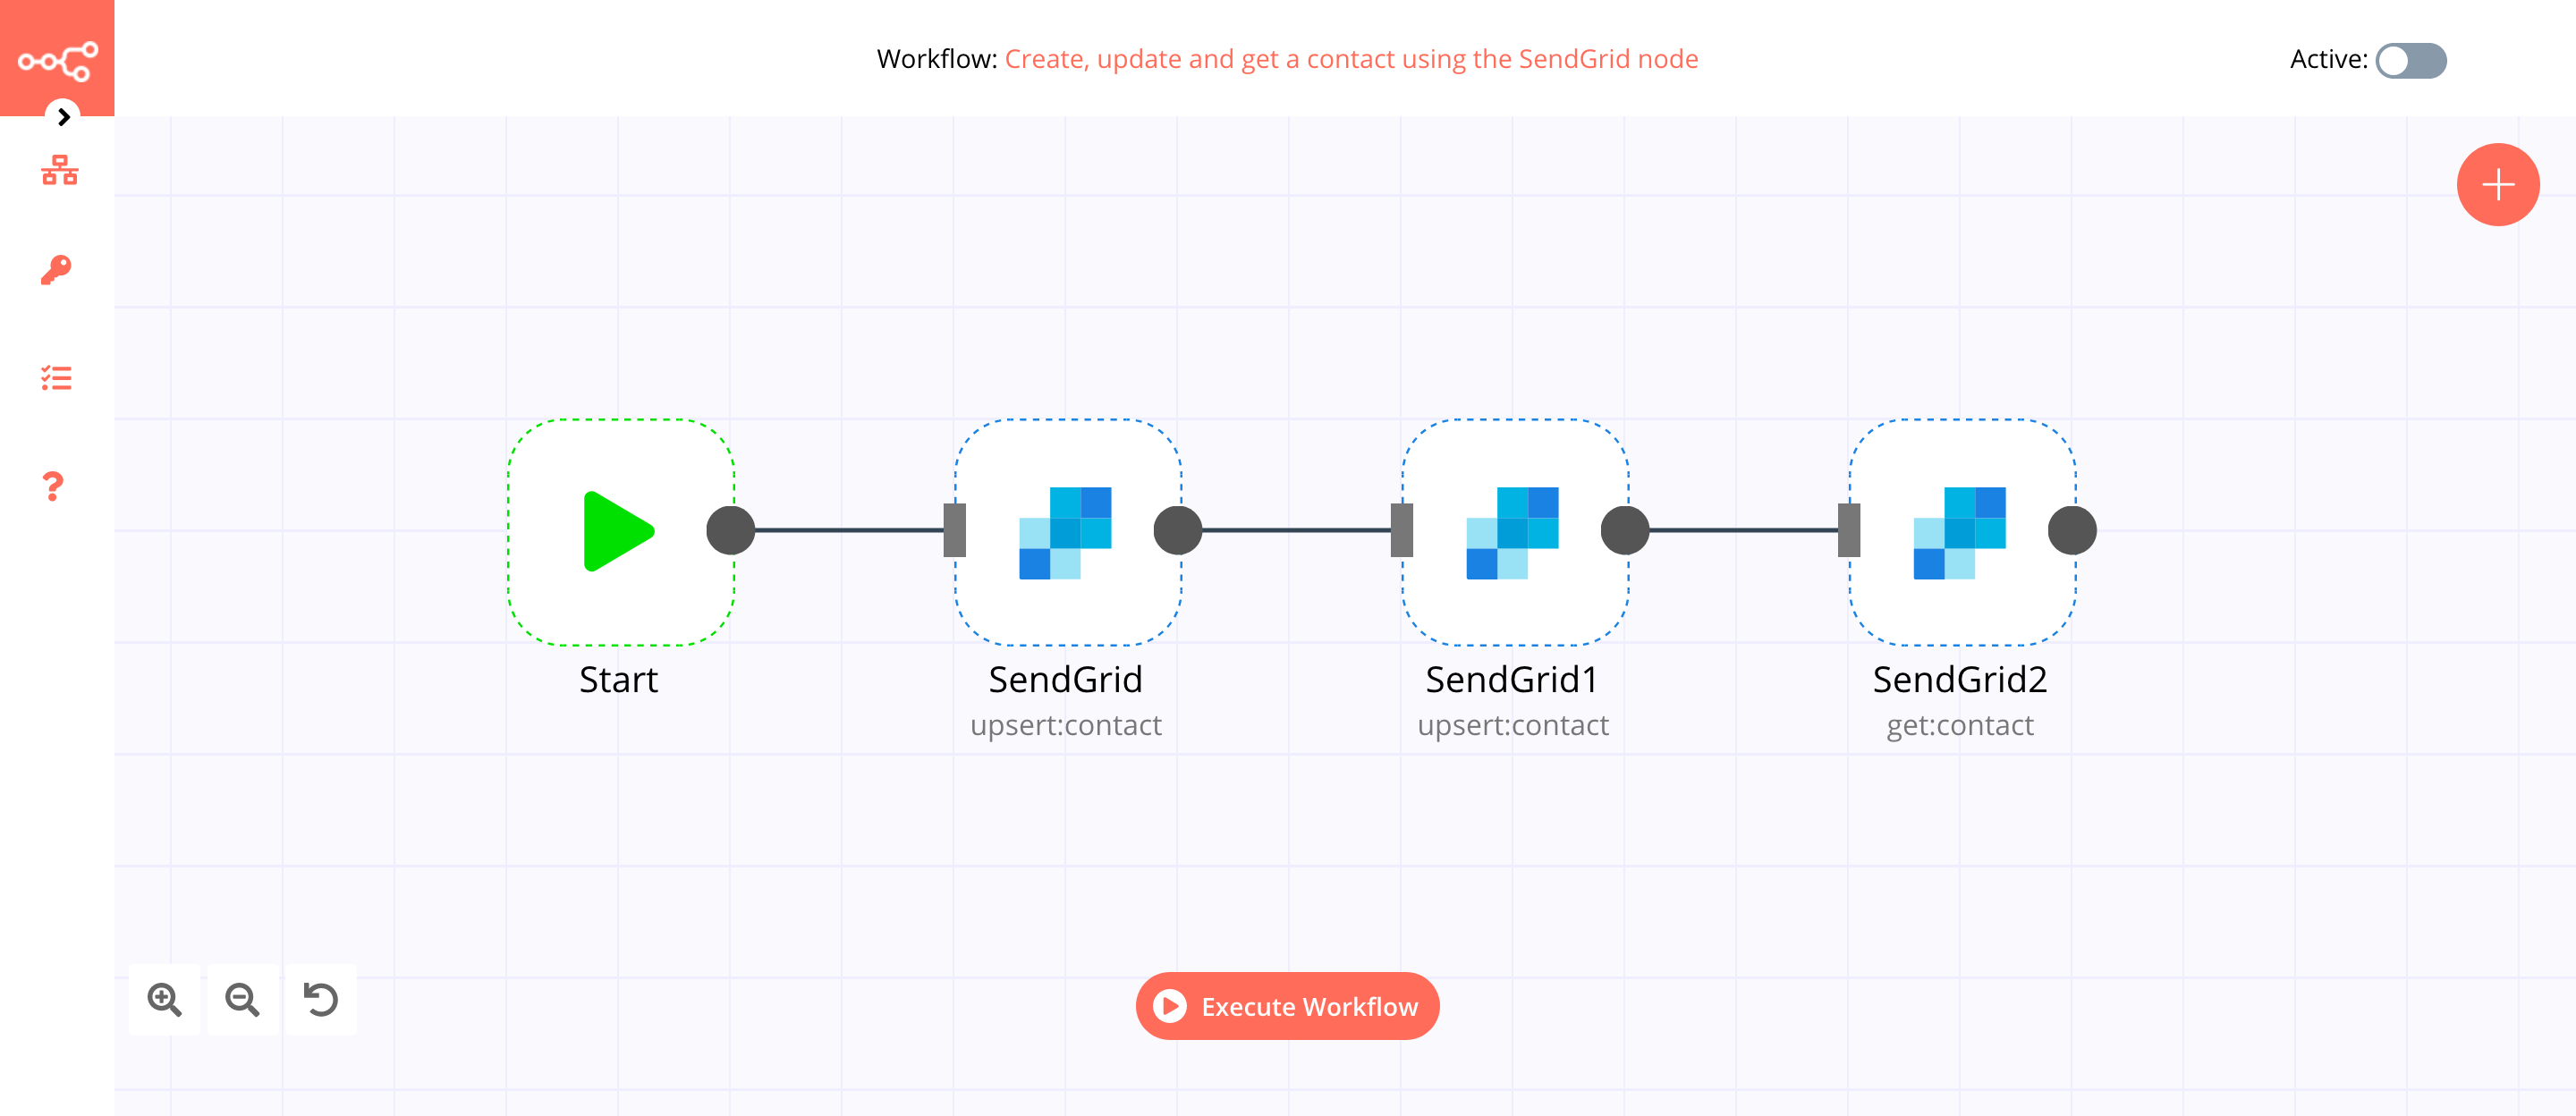 A workflow with the SendGrid node